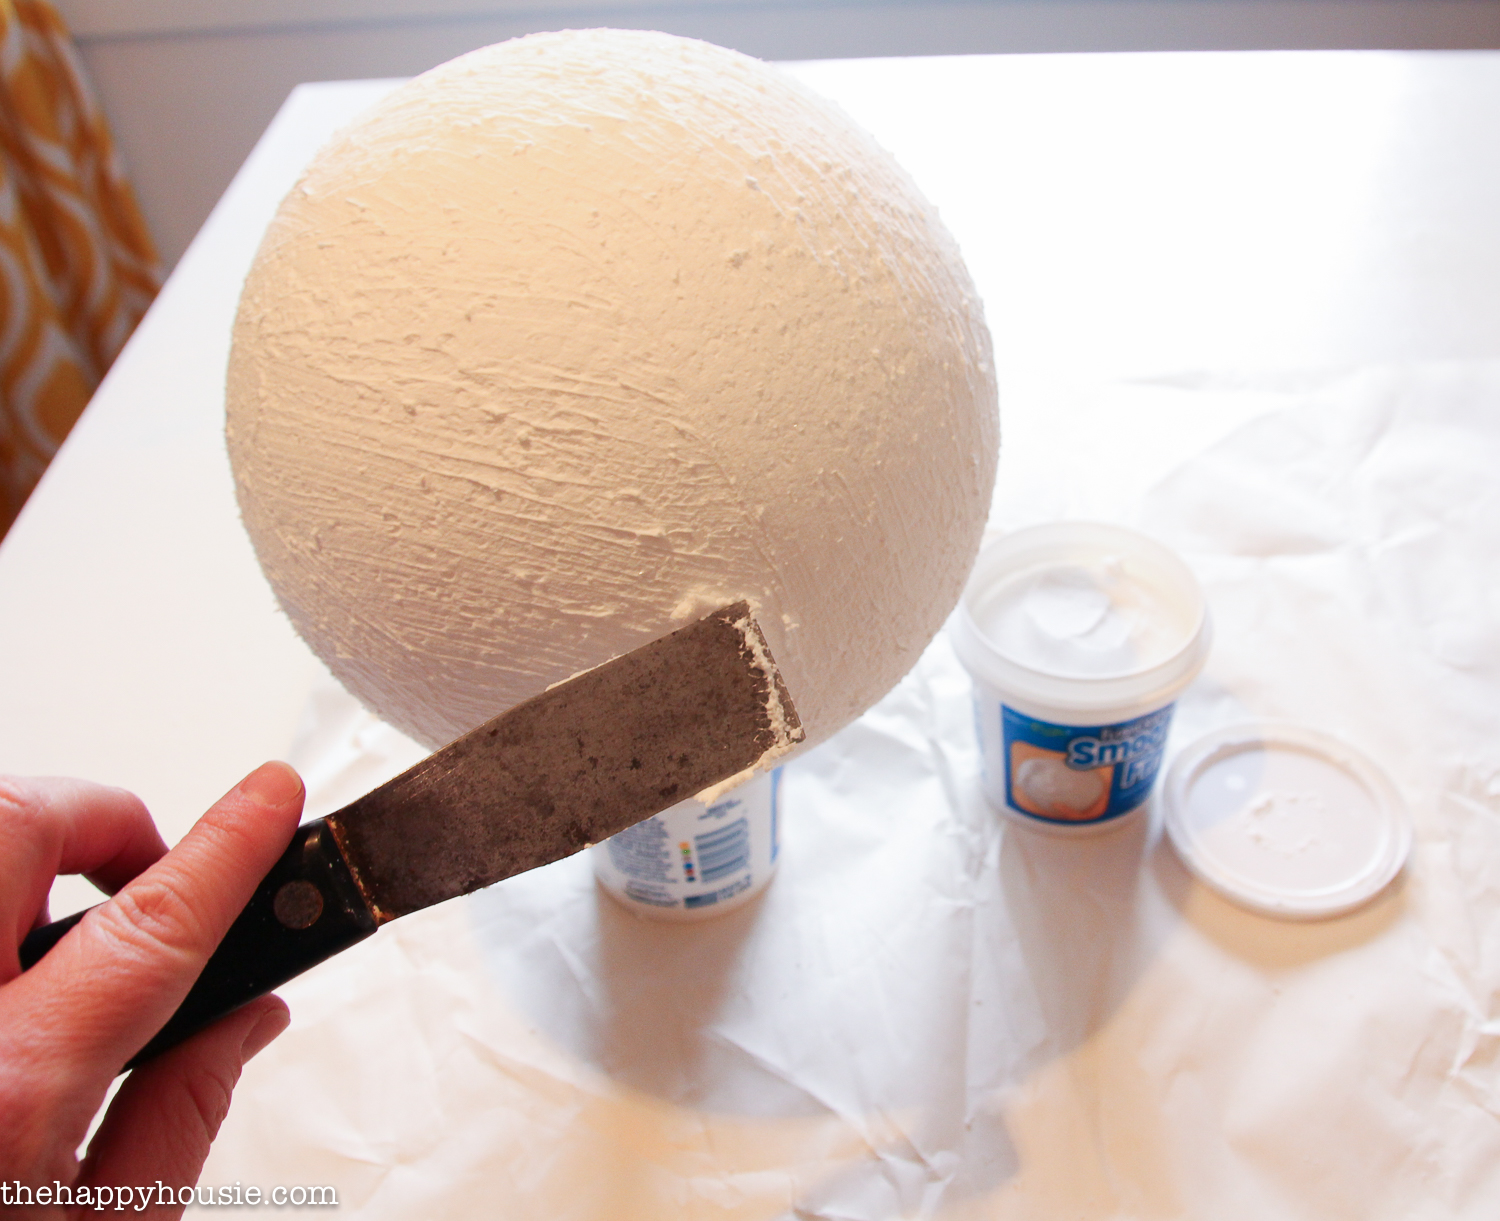 Smoothing smooth finish onto the foam ball.